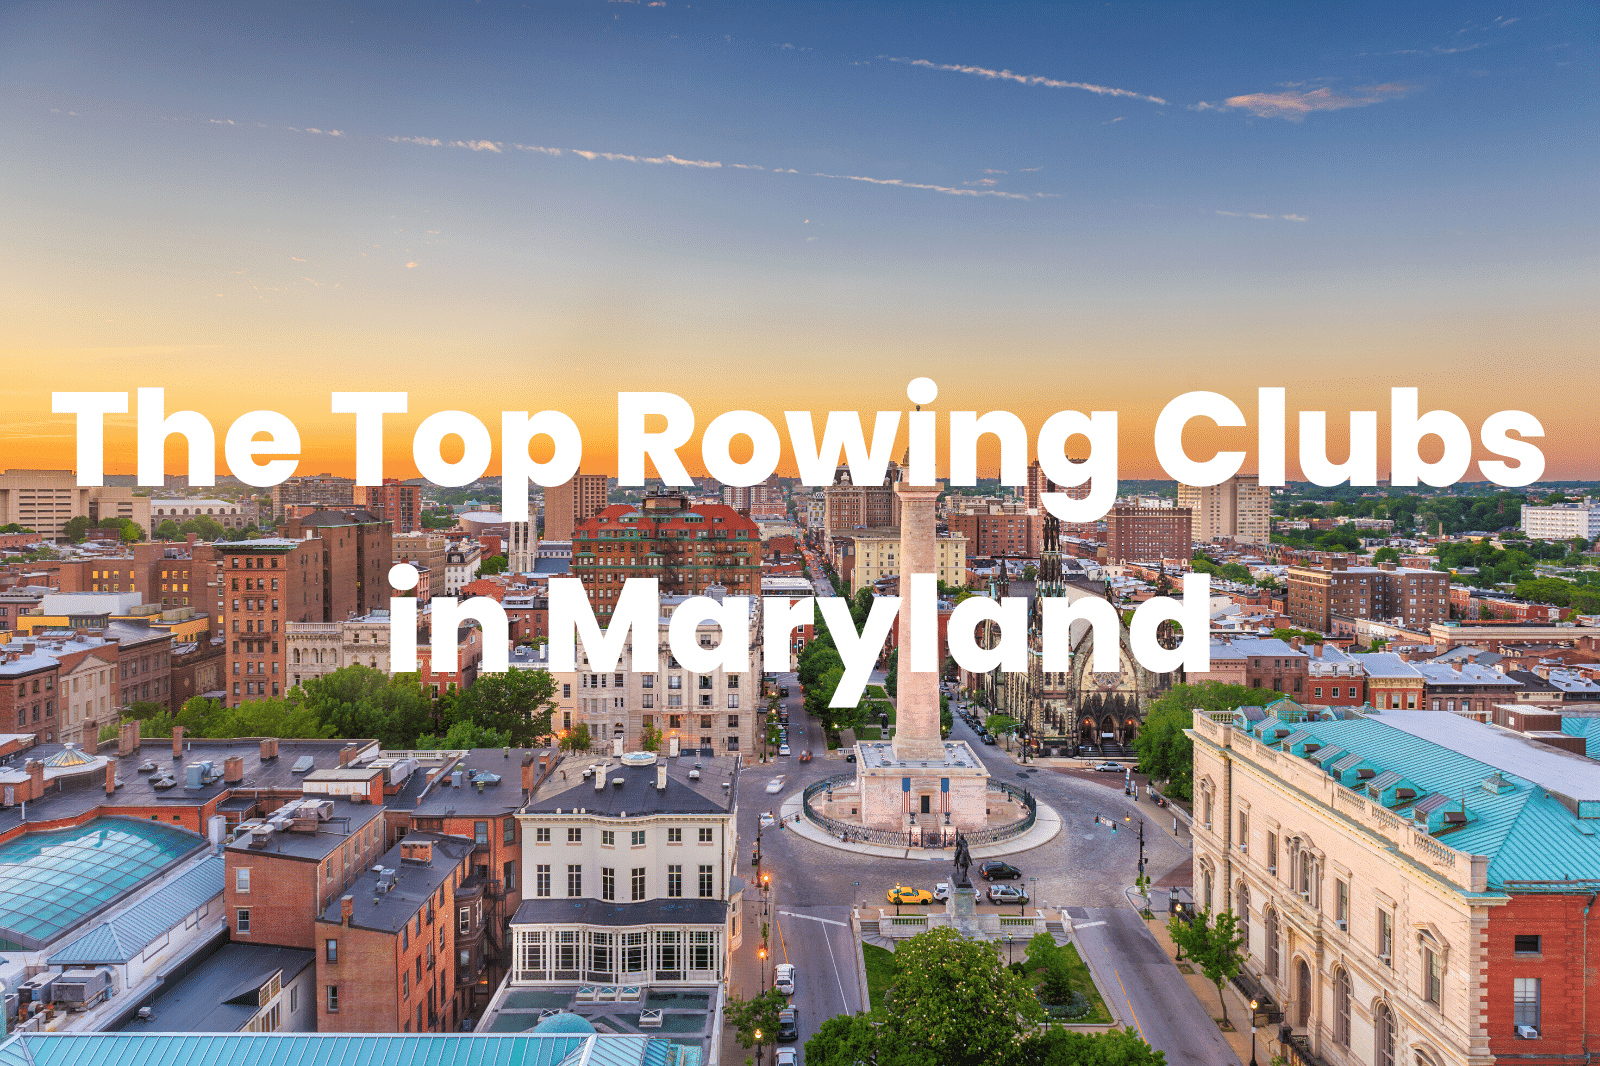 Rowing Clubs in Maryland